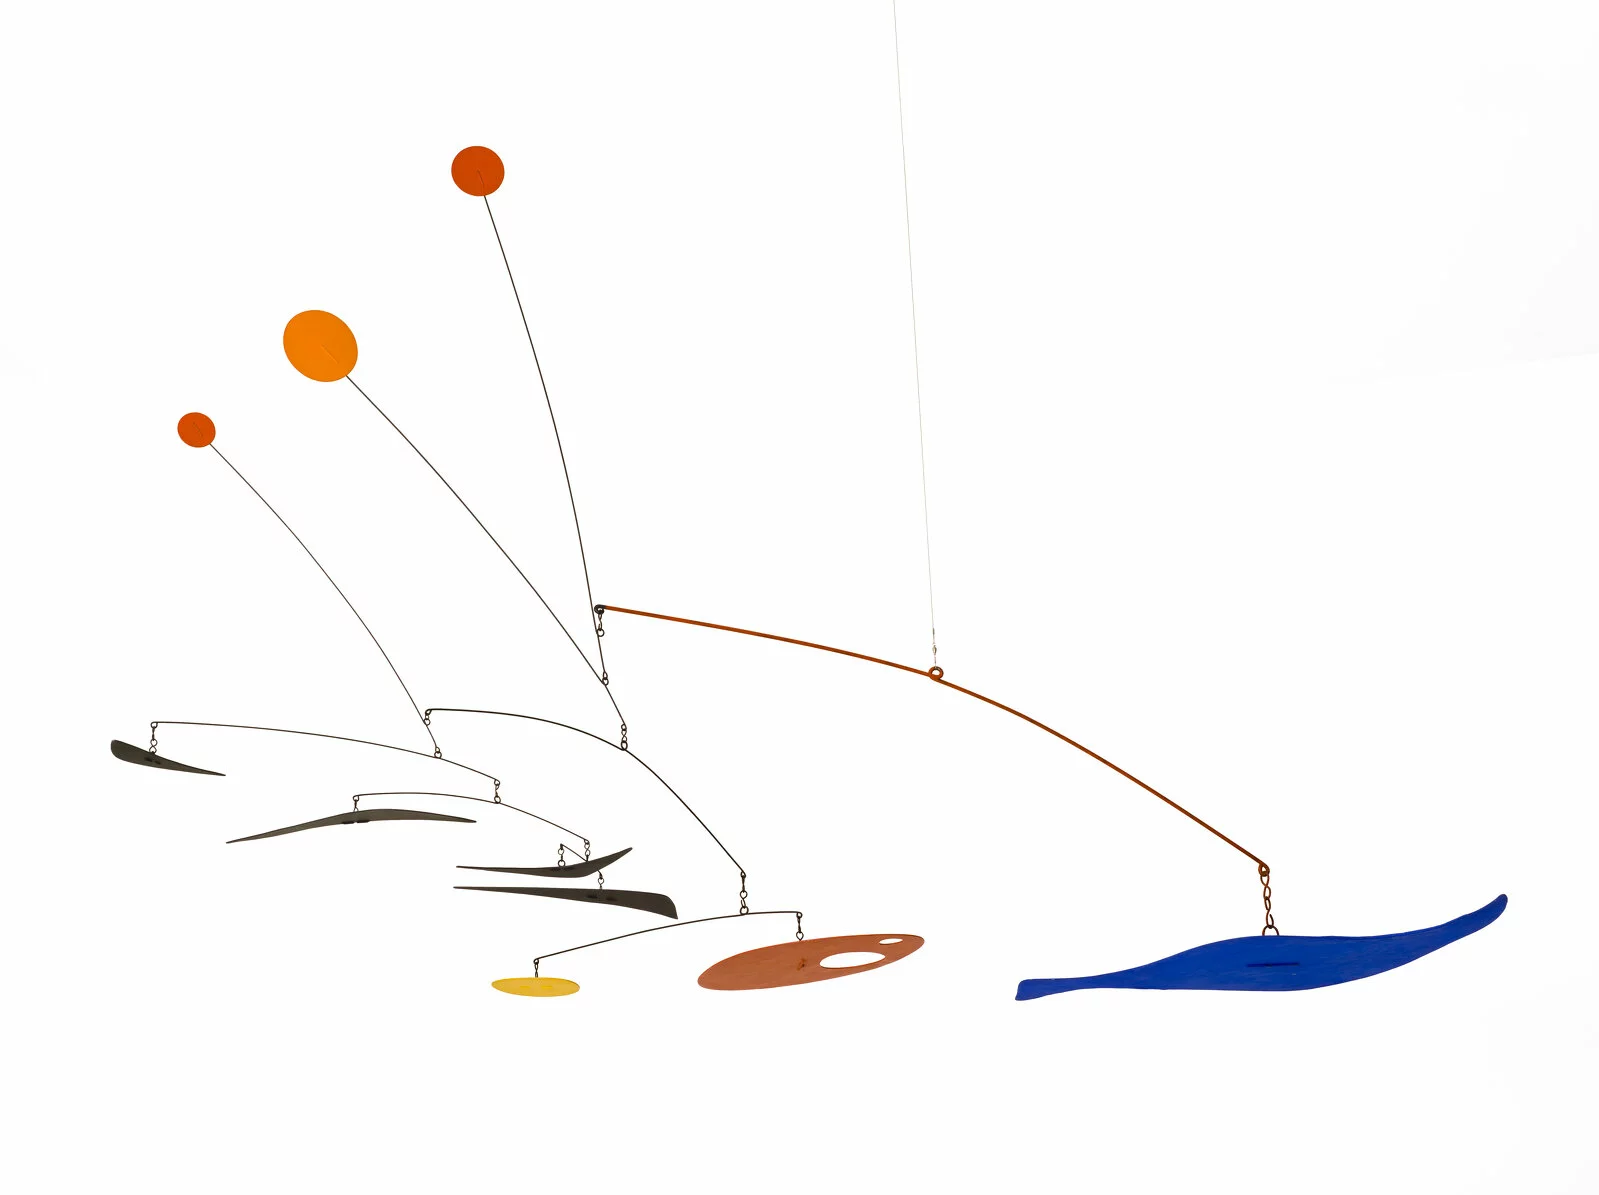 Alexander Calder, <em>Four Boomerangs</em>, c. 1949. Collection Museum of Contemporary Art Chicago, gift of Ruth Horwich, 1991.92. © 2022 Calder Foundation, New York/Artists Rights Society (ARS), New York. Photo: Nathan Keay, © MCA Chicago. 2022/06/1991_92_v13_edit2.jpg 